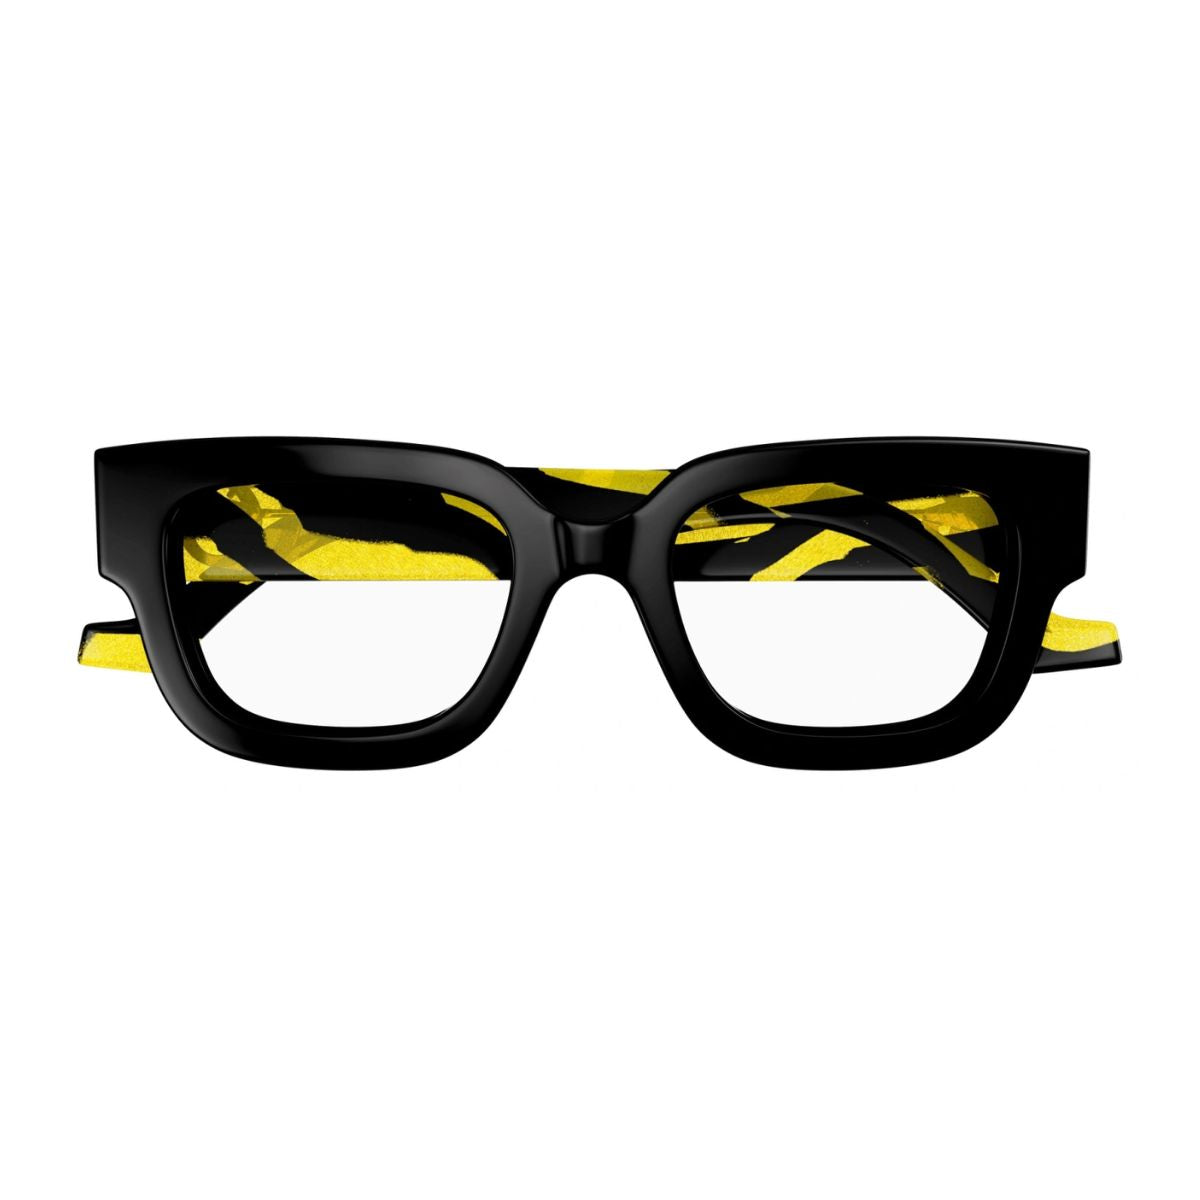 " Gucci 1548O 003 Men's Spectacles - Browse Optorium's Stylish Collection"